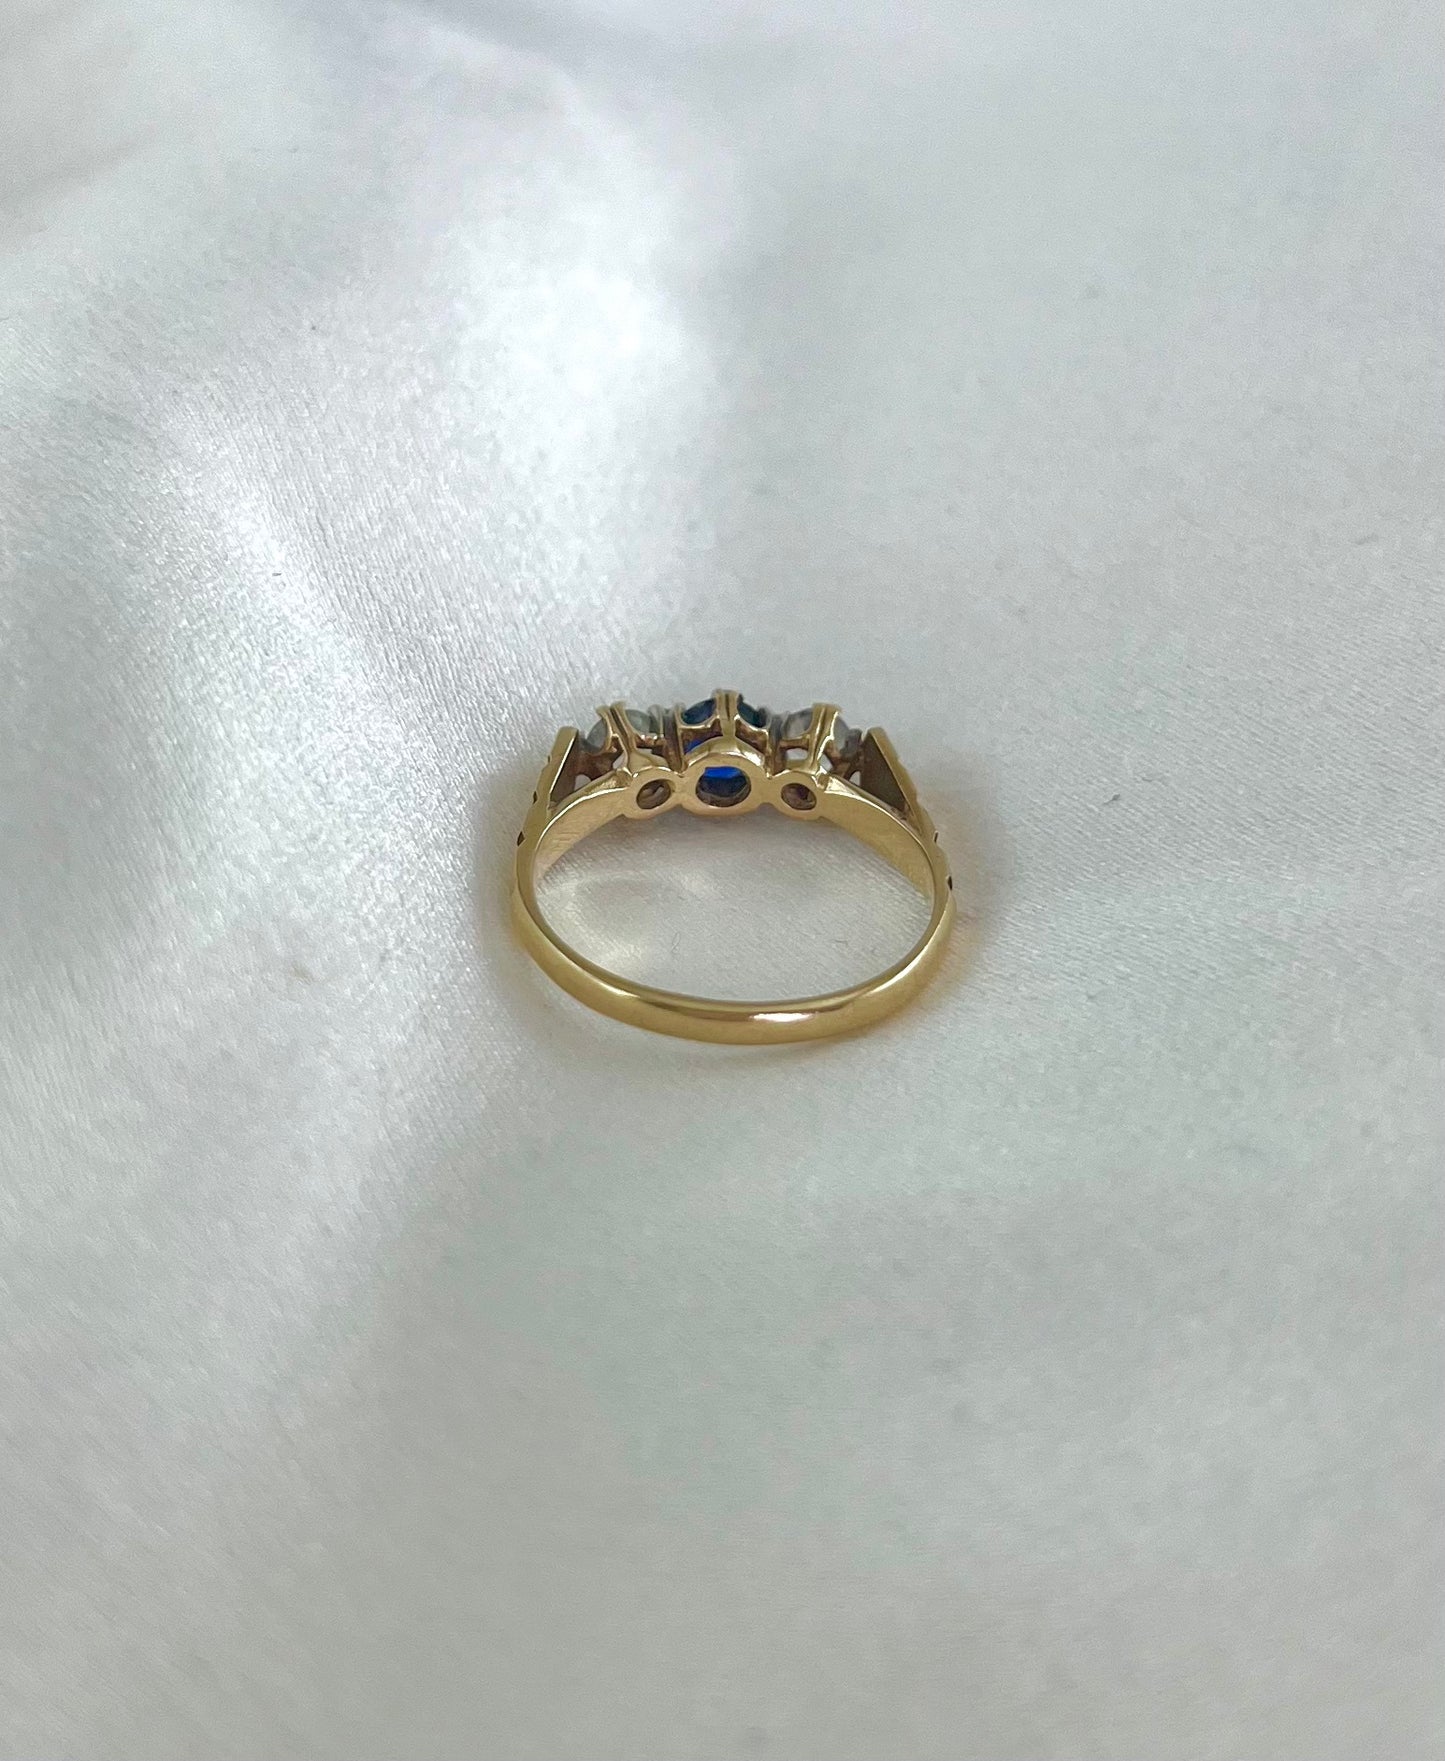 Vintage 9ct Gold Sapphire Paste 3 Stone Ring, Size M UK 1970s